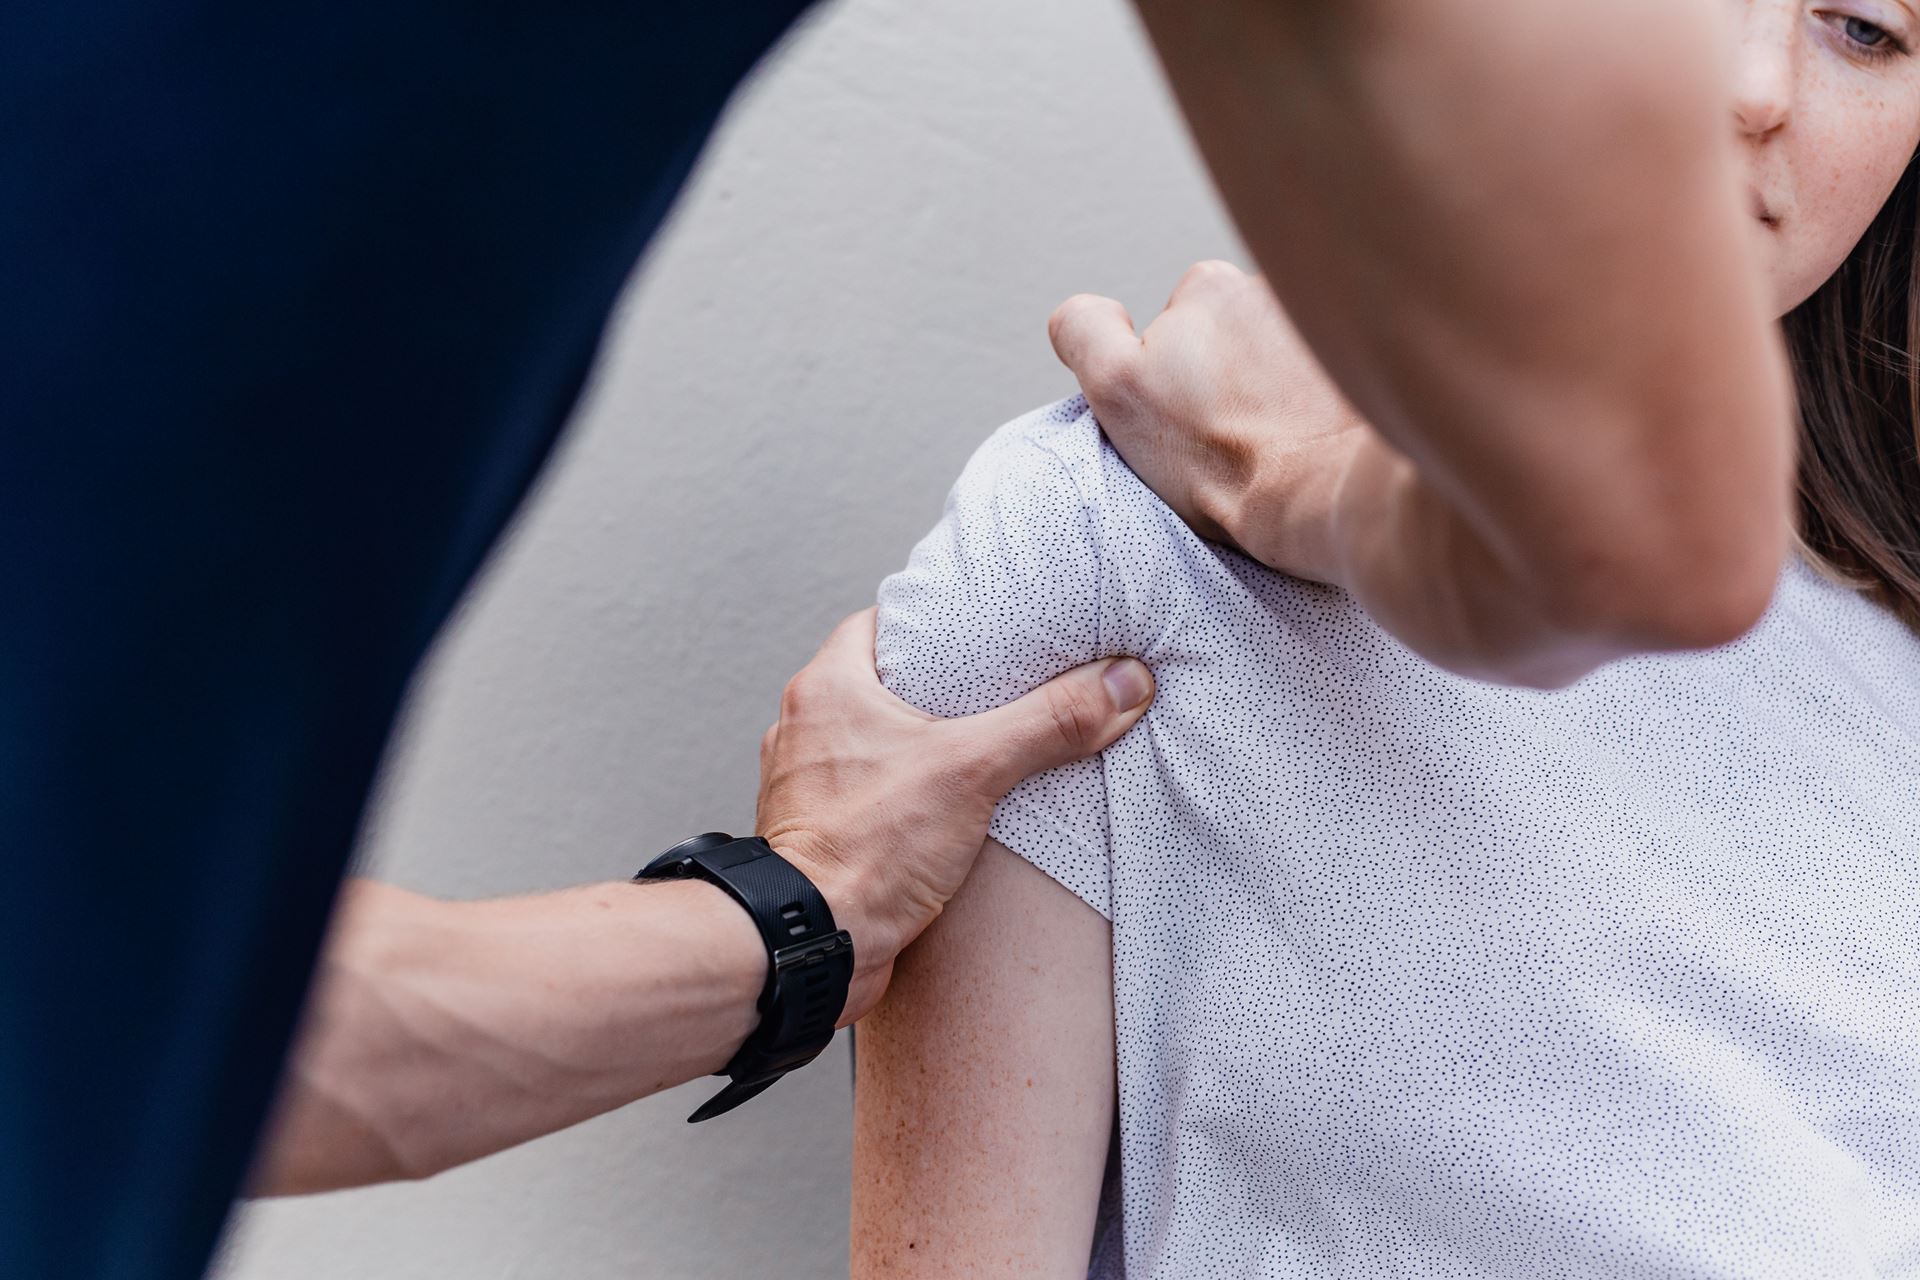 A physiotherapist manipulating someone's shoulder